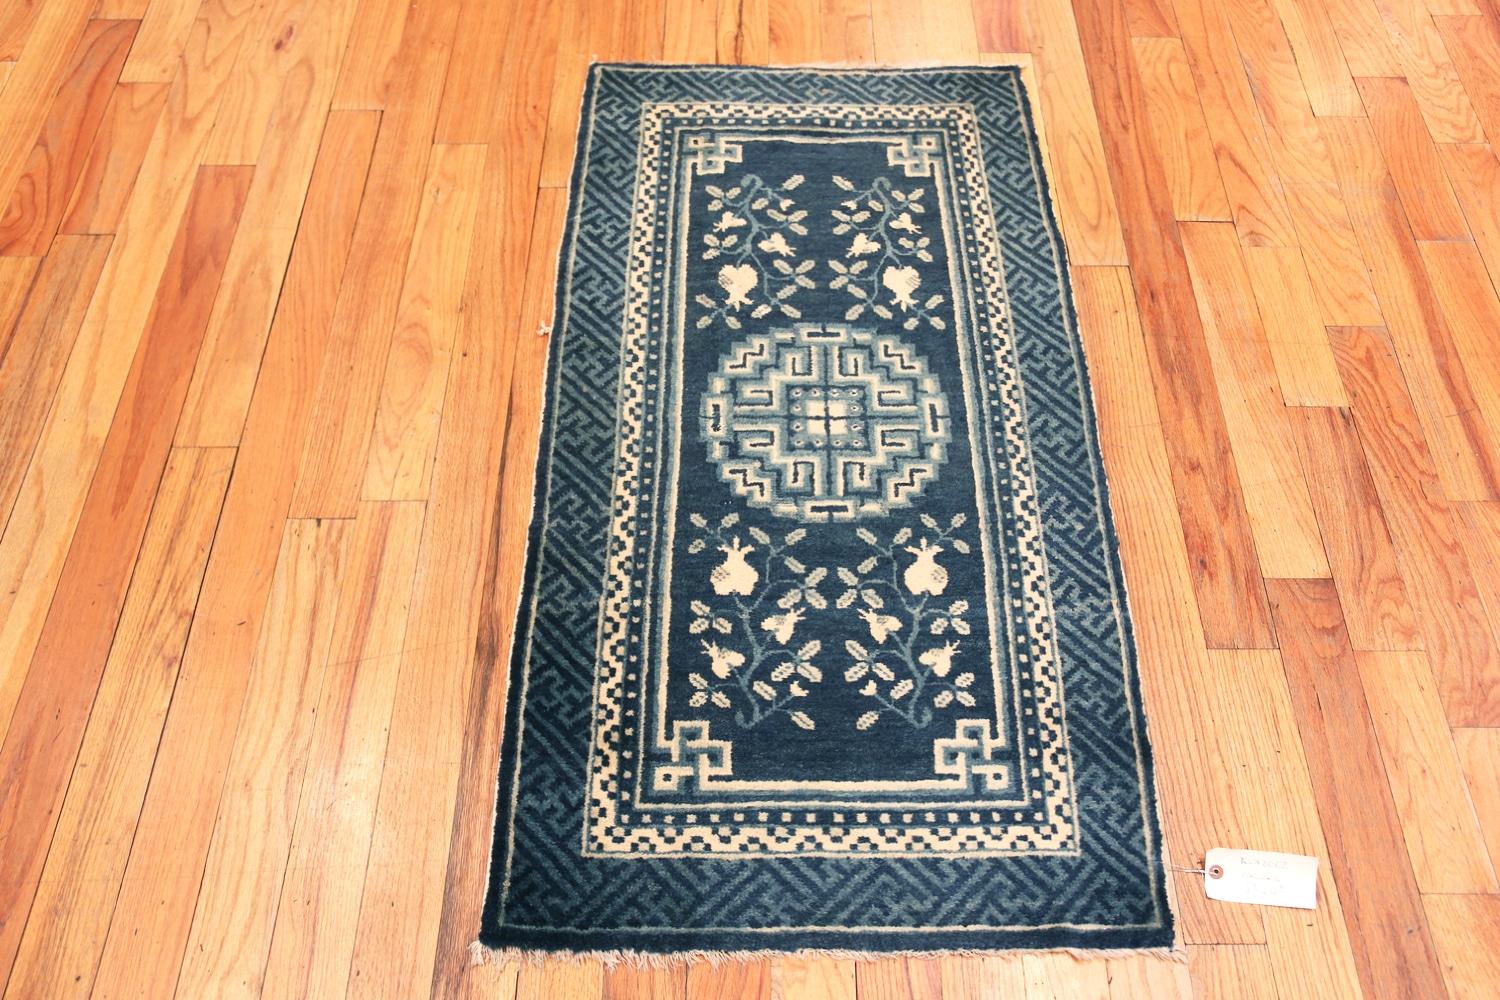 Charming And Artistic Blue Background With White Patterns Antique Pomegranate Design Chinese Rug, Country of Origin: China, Circa Date: 1900 – This is a small scatter size rug that’s optimal for people who want to decorate their home with a